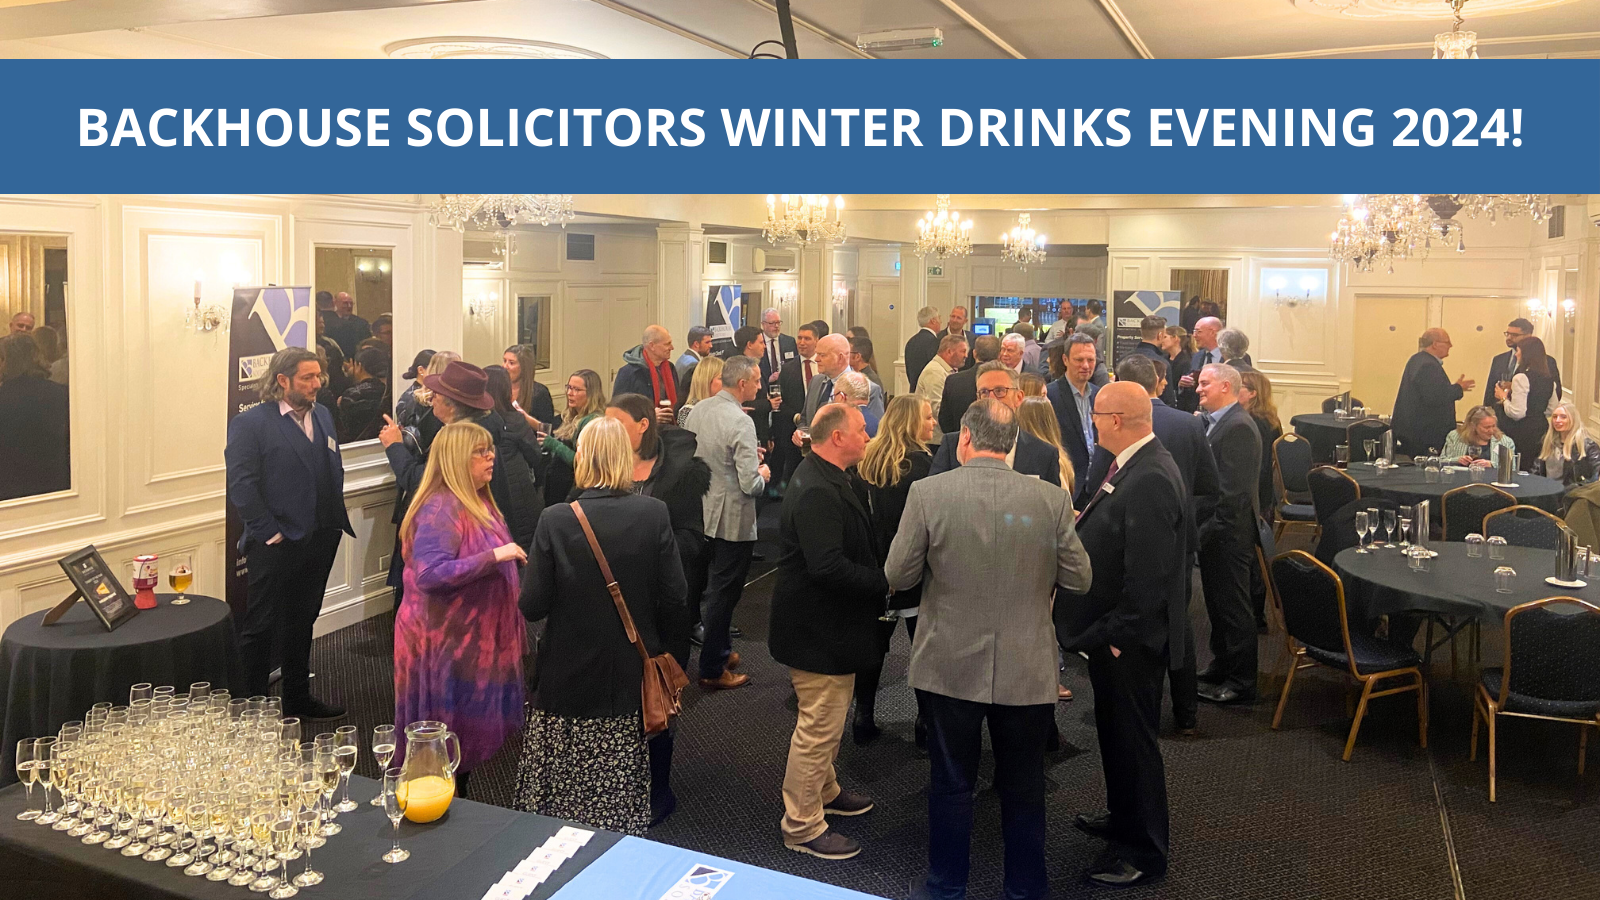 Backhouse Solicitors Winter Drinks Evening 2024